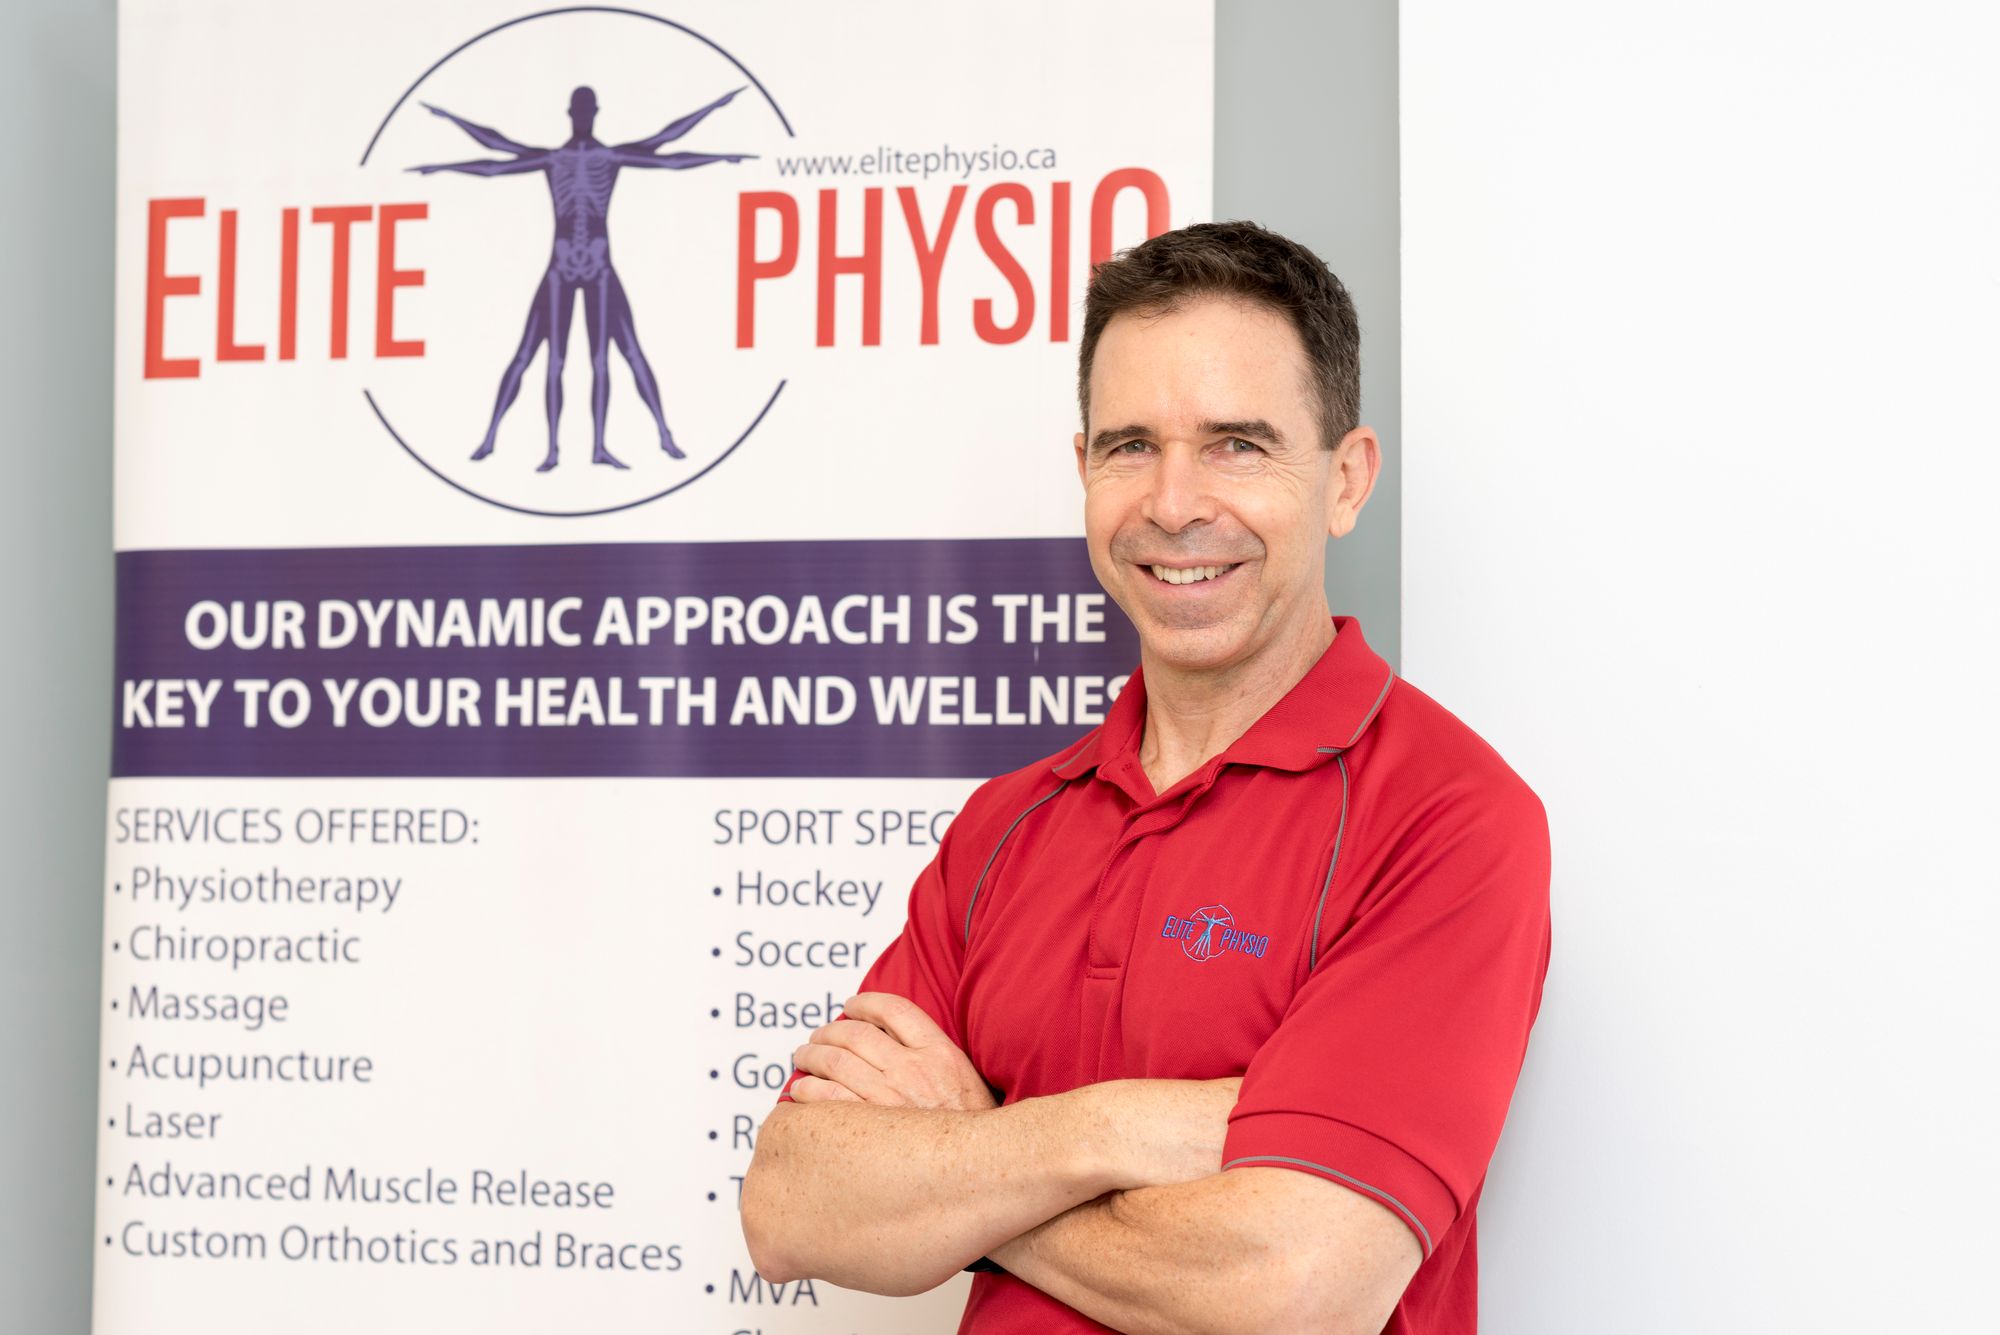 Physiotherapy, Chiropractic & Massage Therapy - Elite Physio